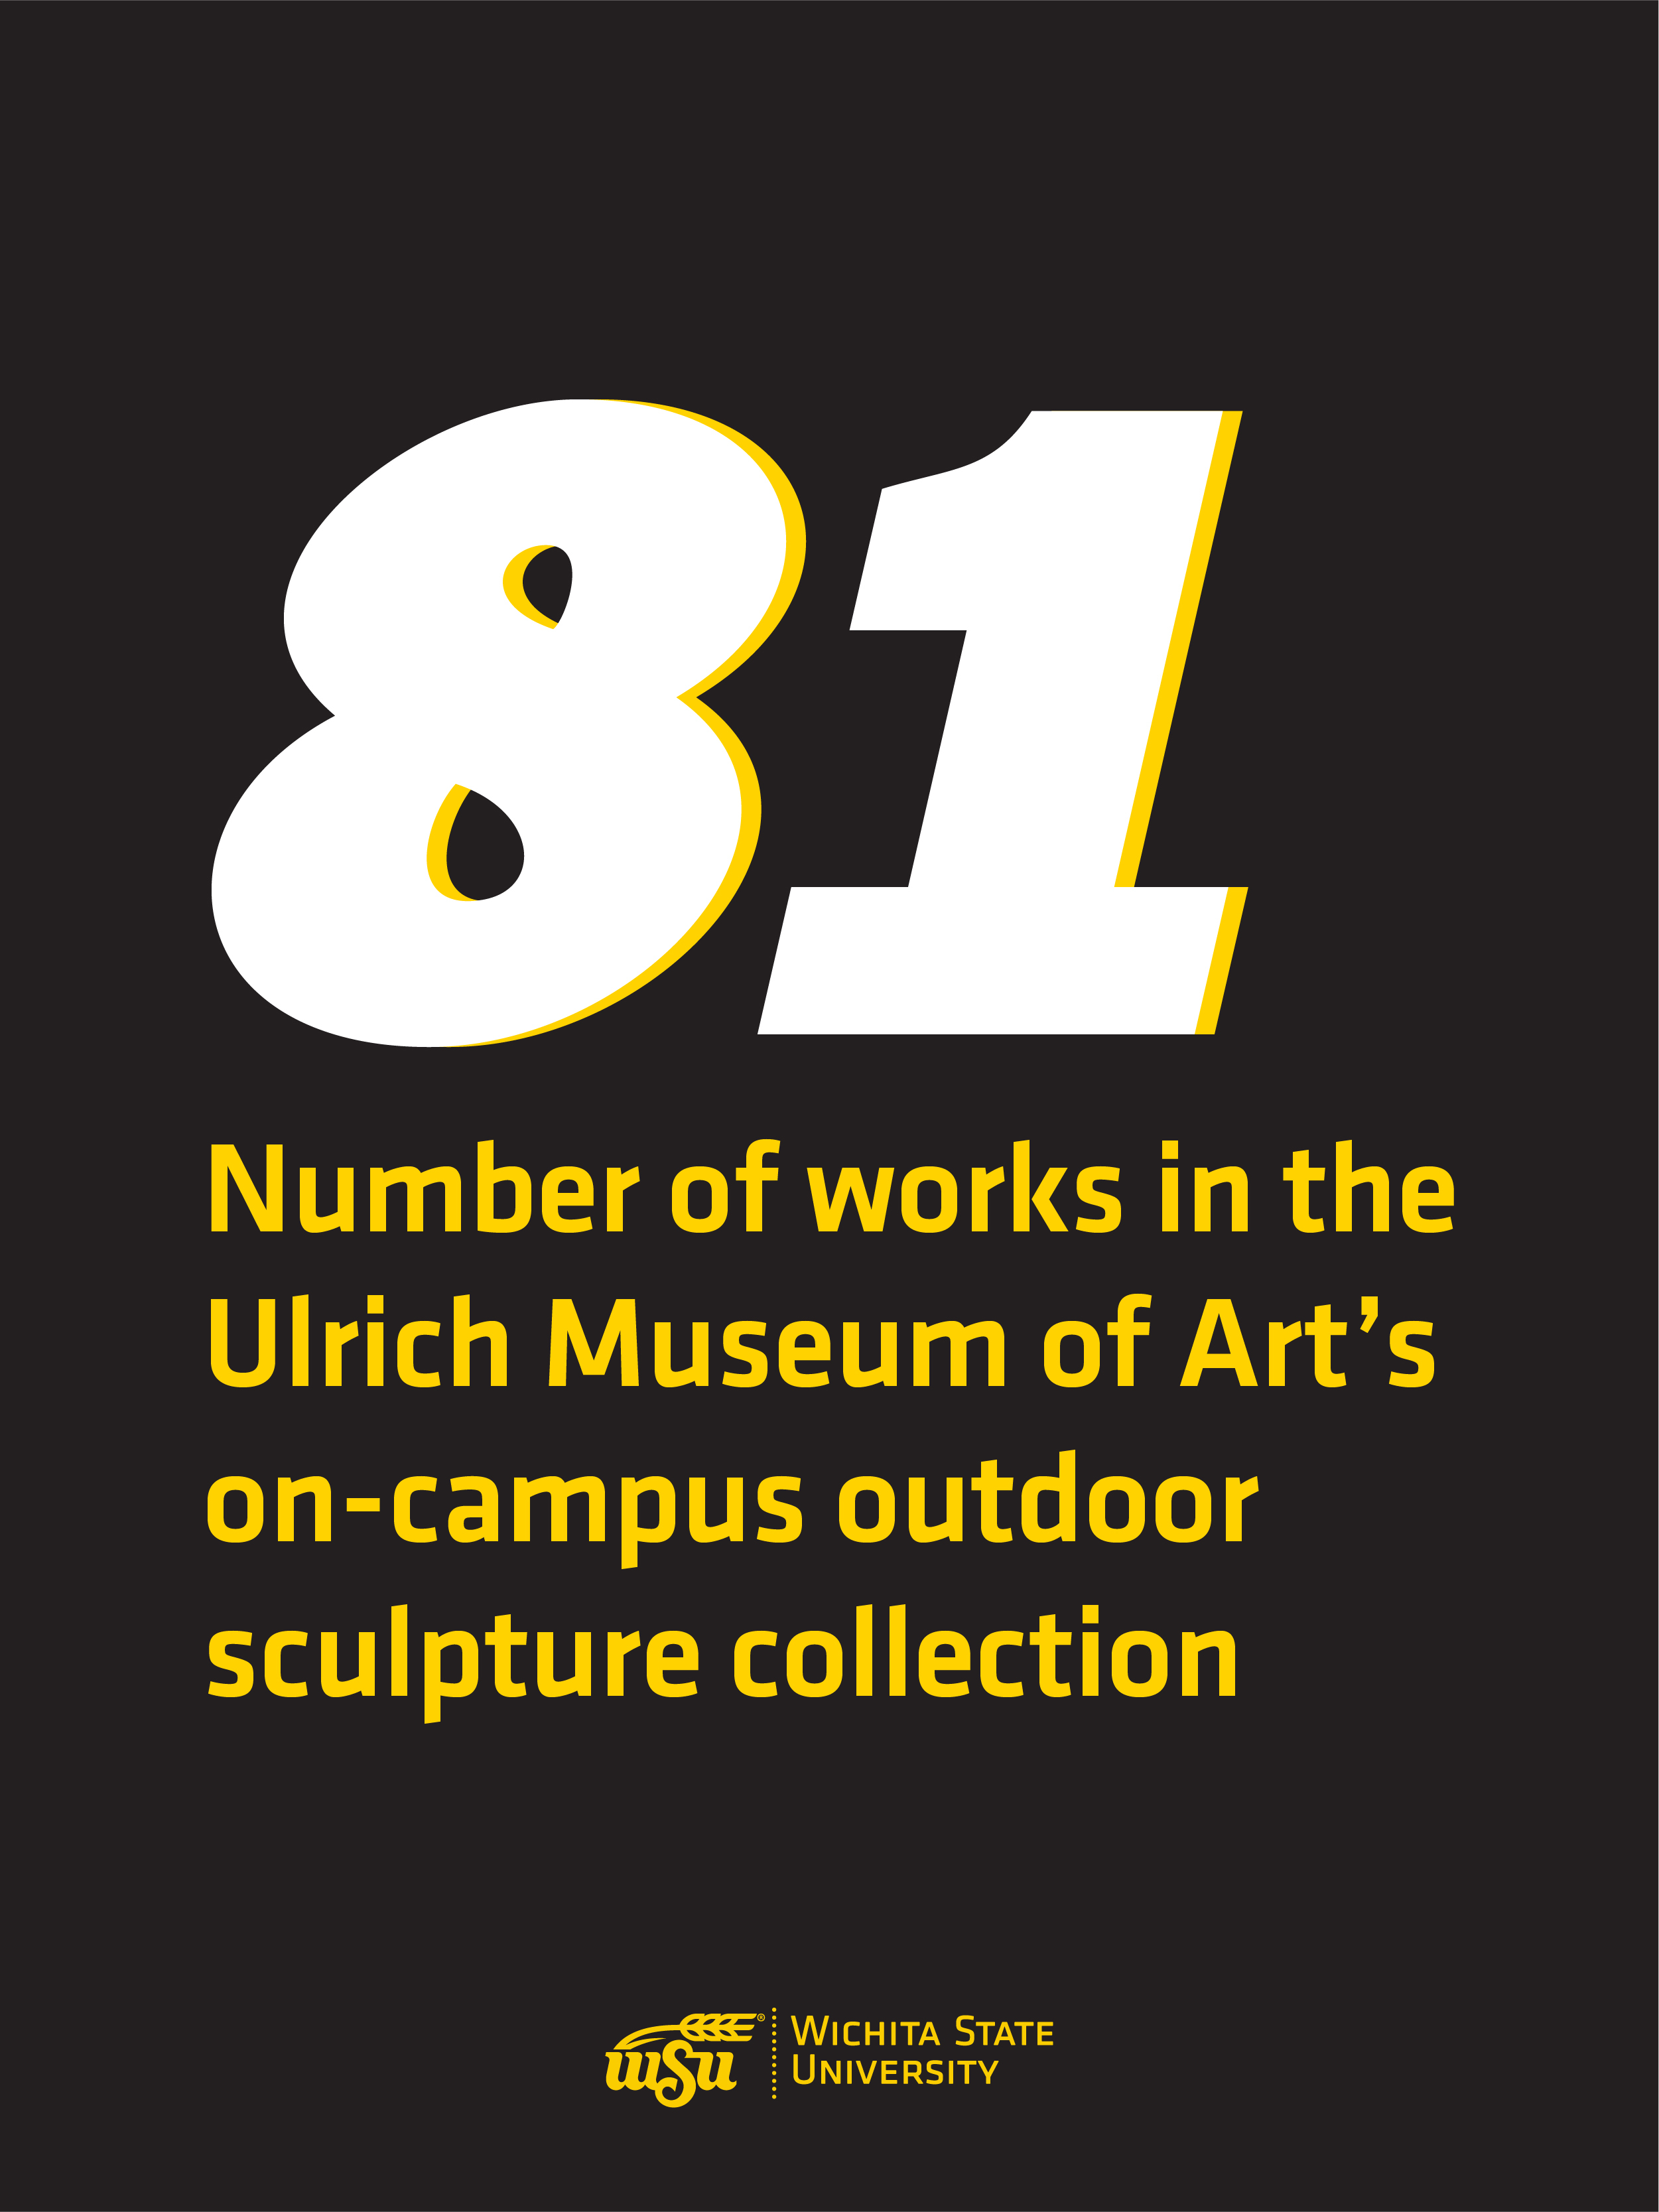 The Ulrich Museum of Art’s world class Martin H. Bush Outdoor Sculpture Collection features 81 works across the 330-acre Wichita State University campus.